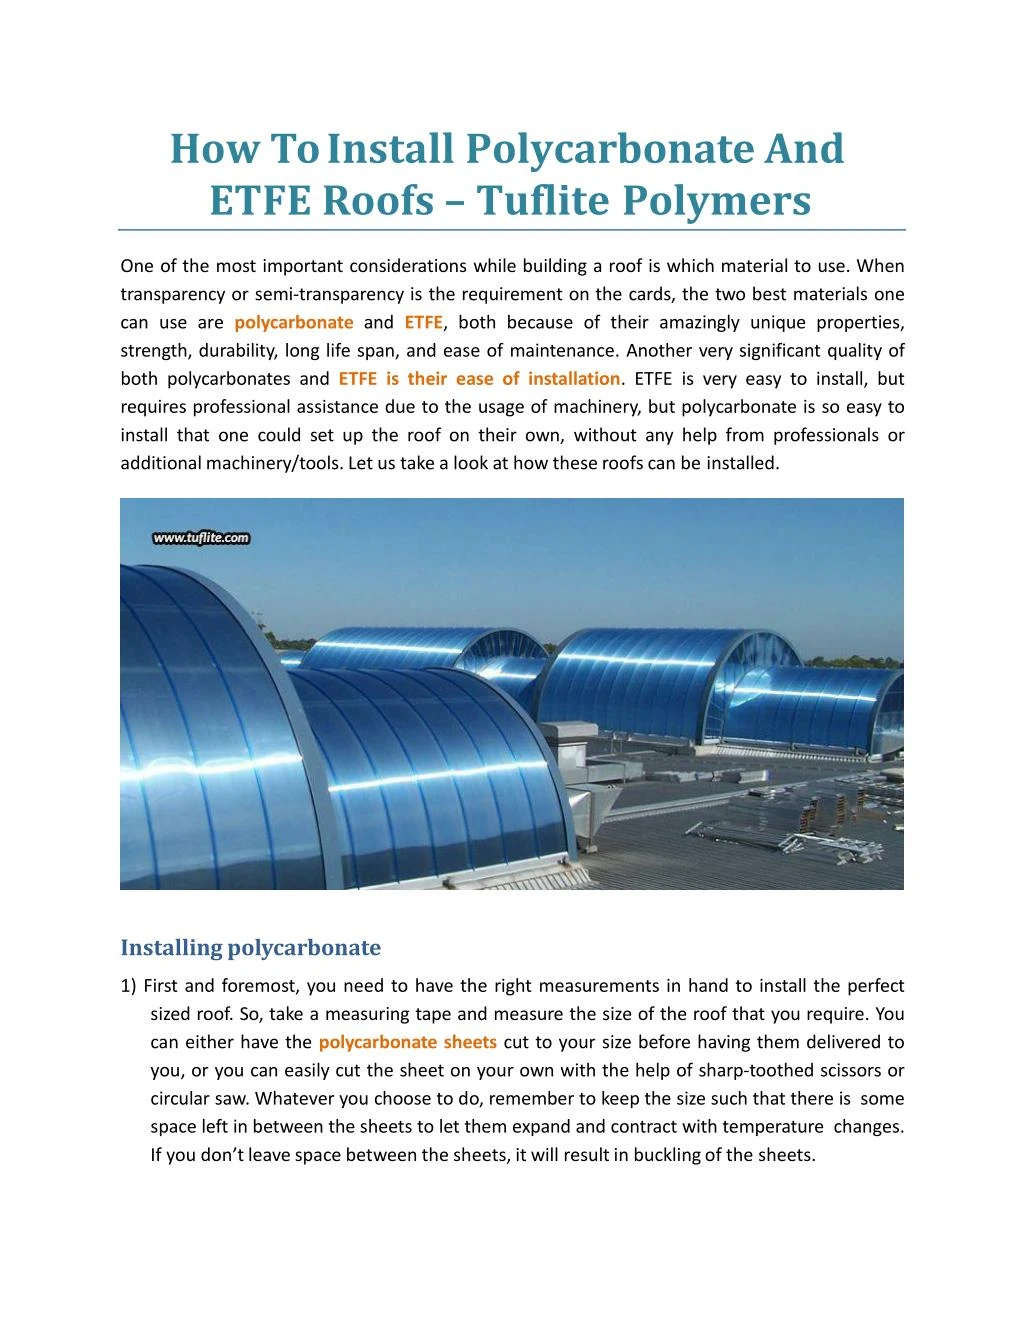 how to install polycarbonate and etfe roofs tuflite polymers